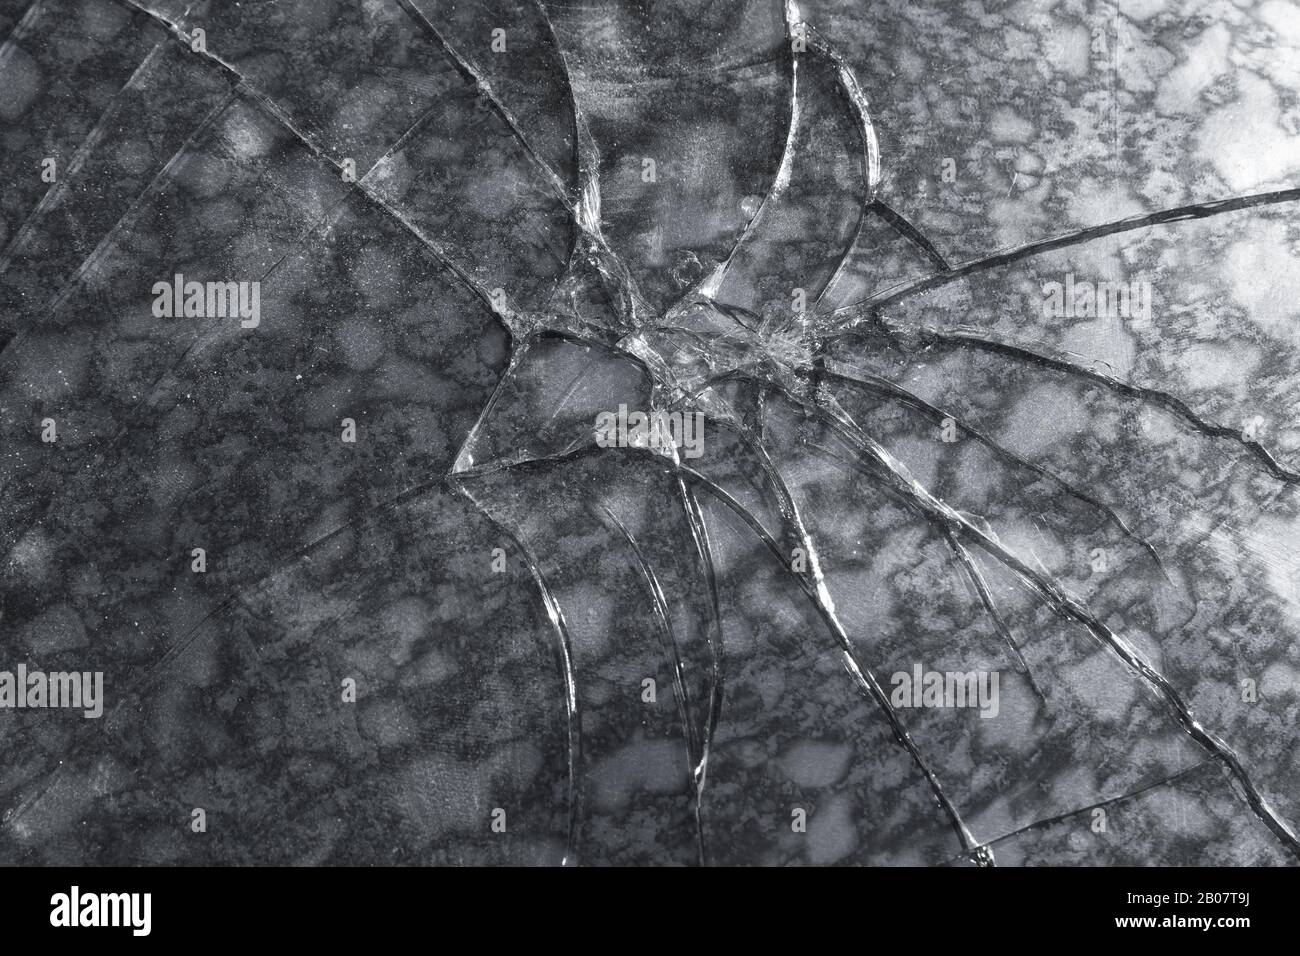 Abstract texture of a broken glass sheet over dark stone background Stock Photo